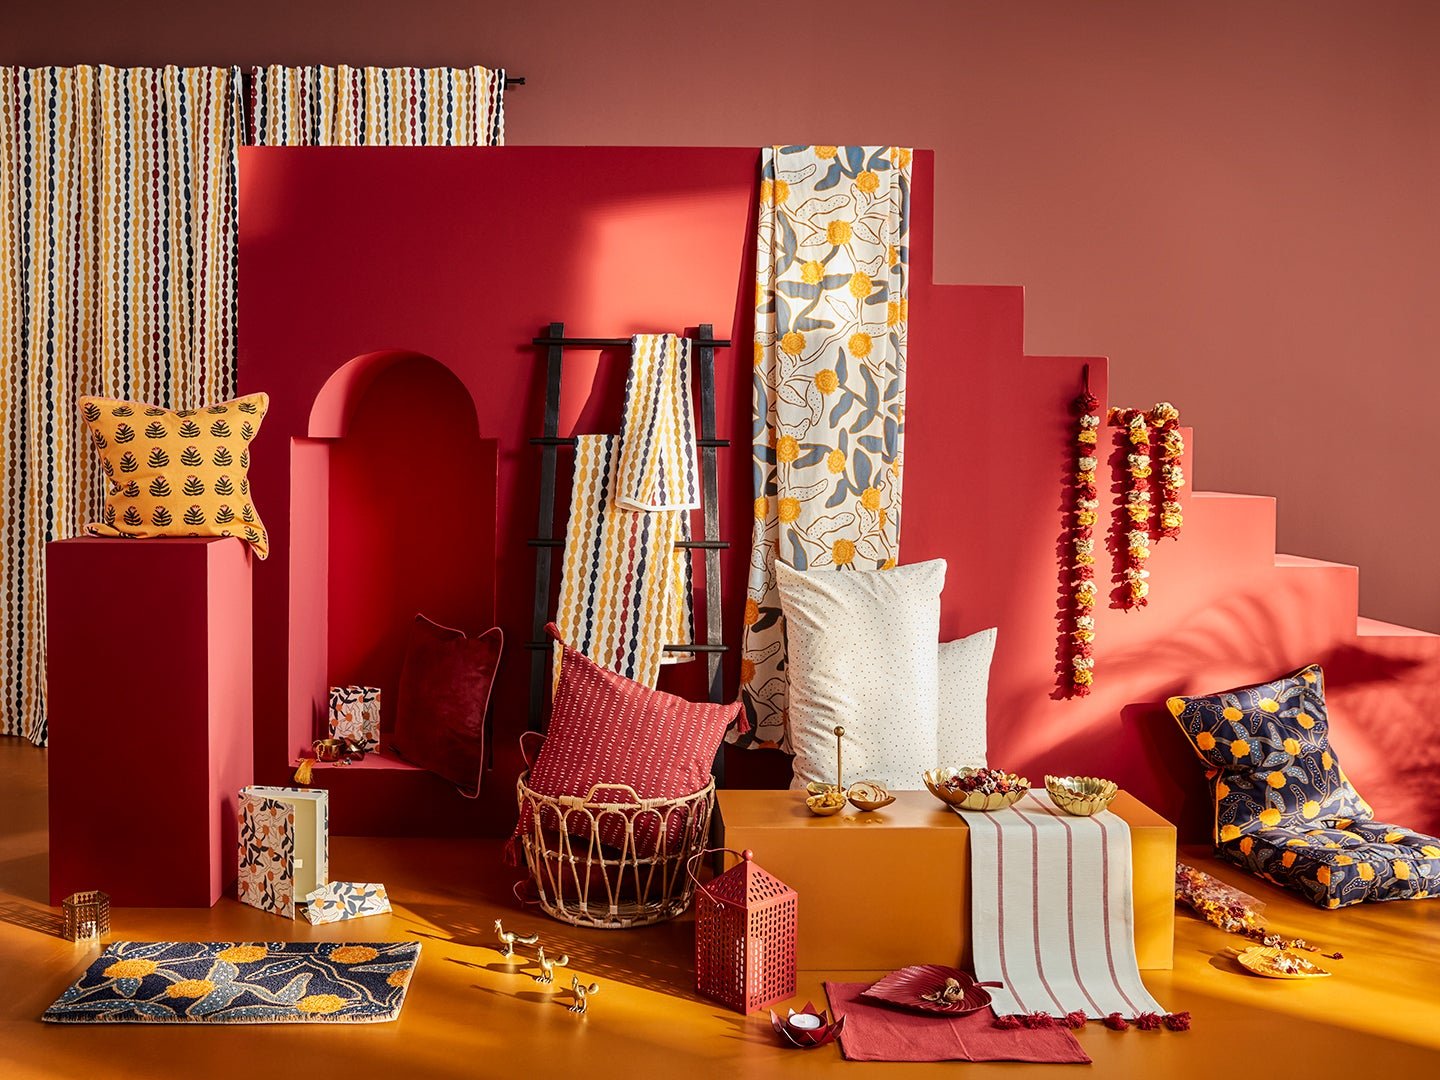 IKEA’s New Collection Features This Cheerful Fall Color in $13 Towels and $7 Pillows